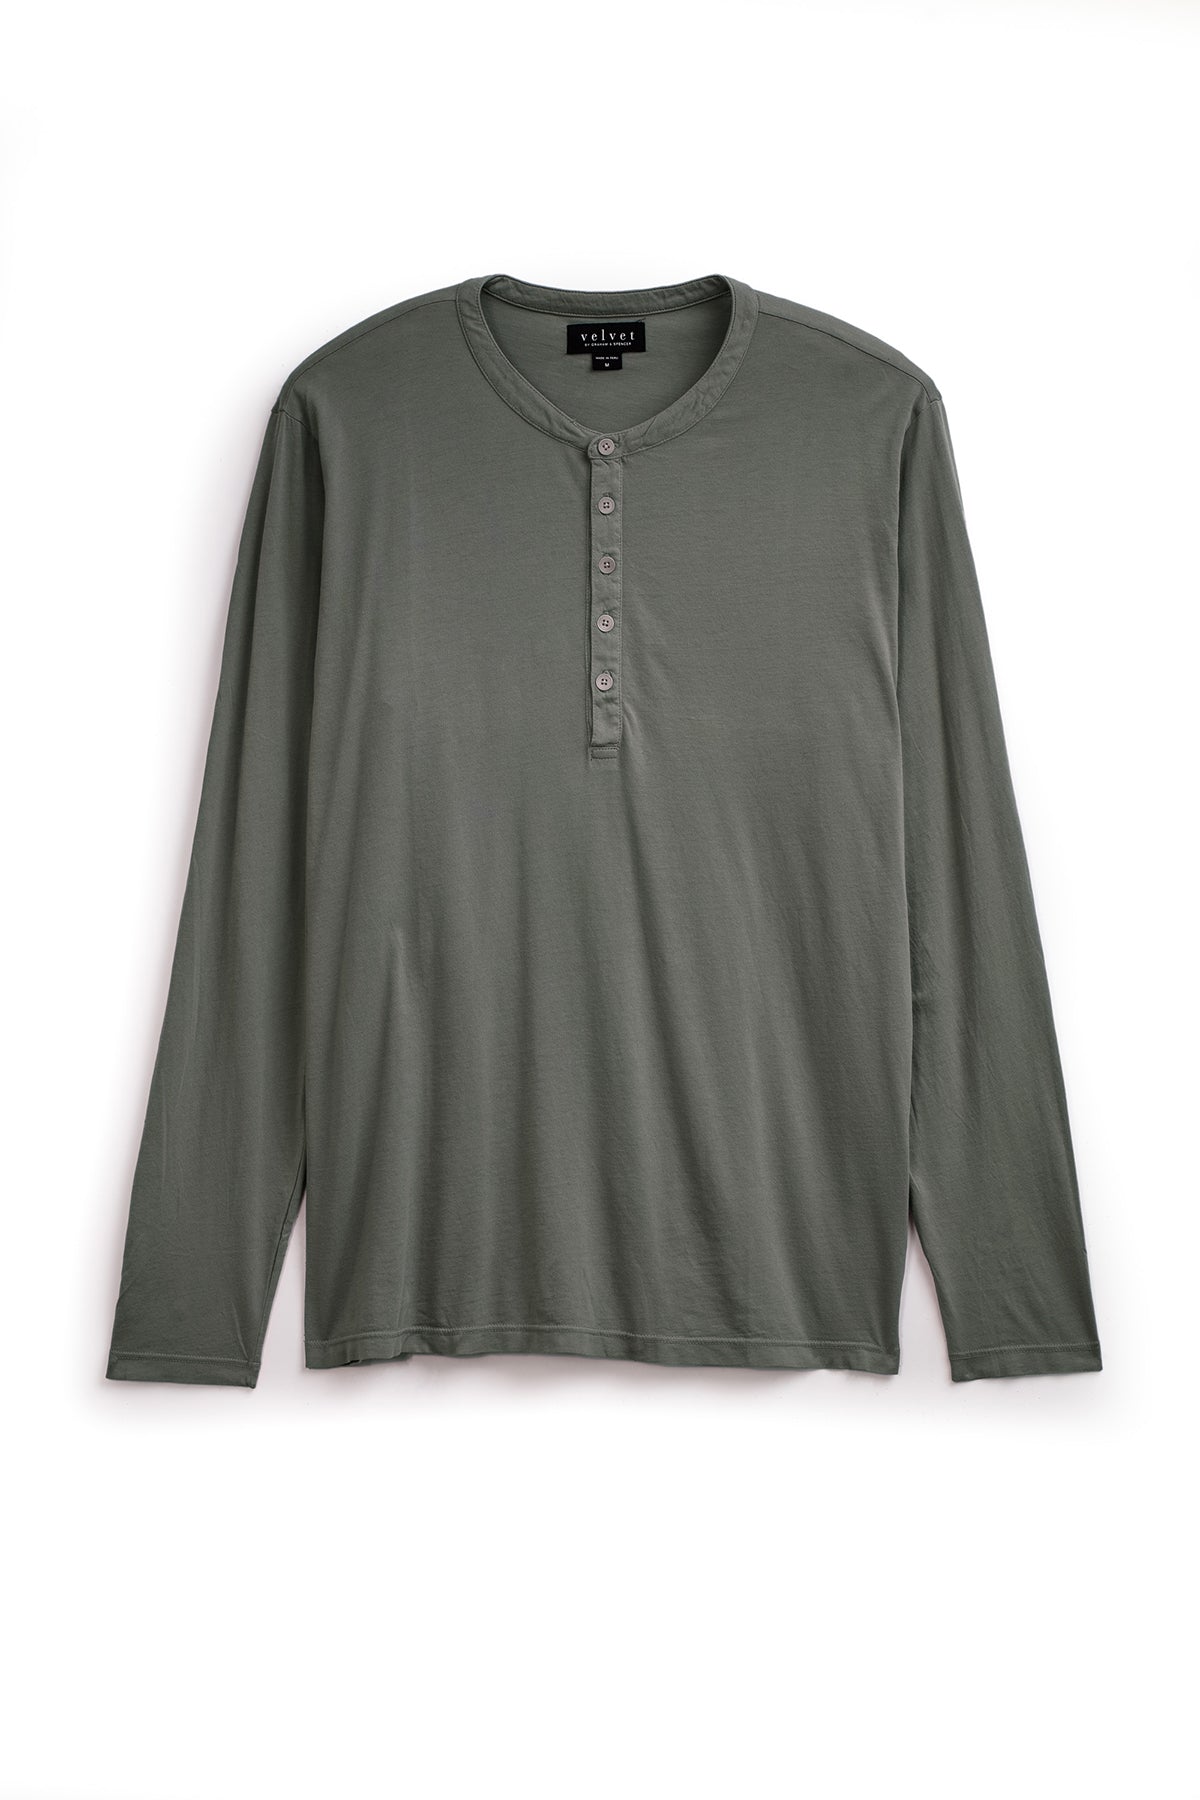 A long-sleeve, olive green ALVARO HENLEY by Velvet by Graham & Spencer crafted from lightweight whisper knit fabric, featuring a round collar and a button placket down the front.-23790561755329